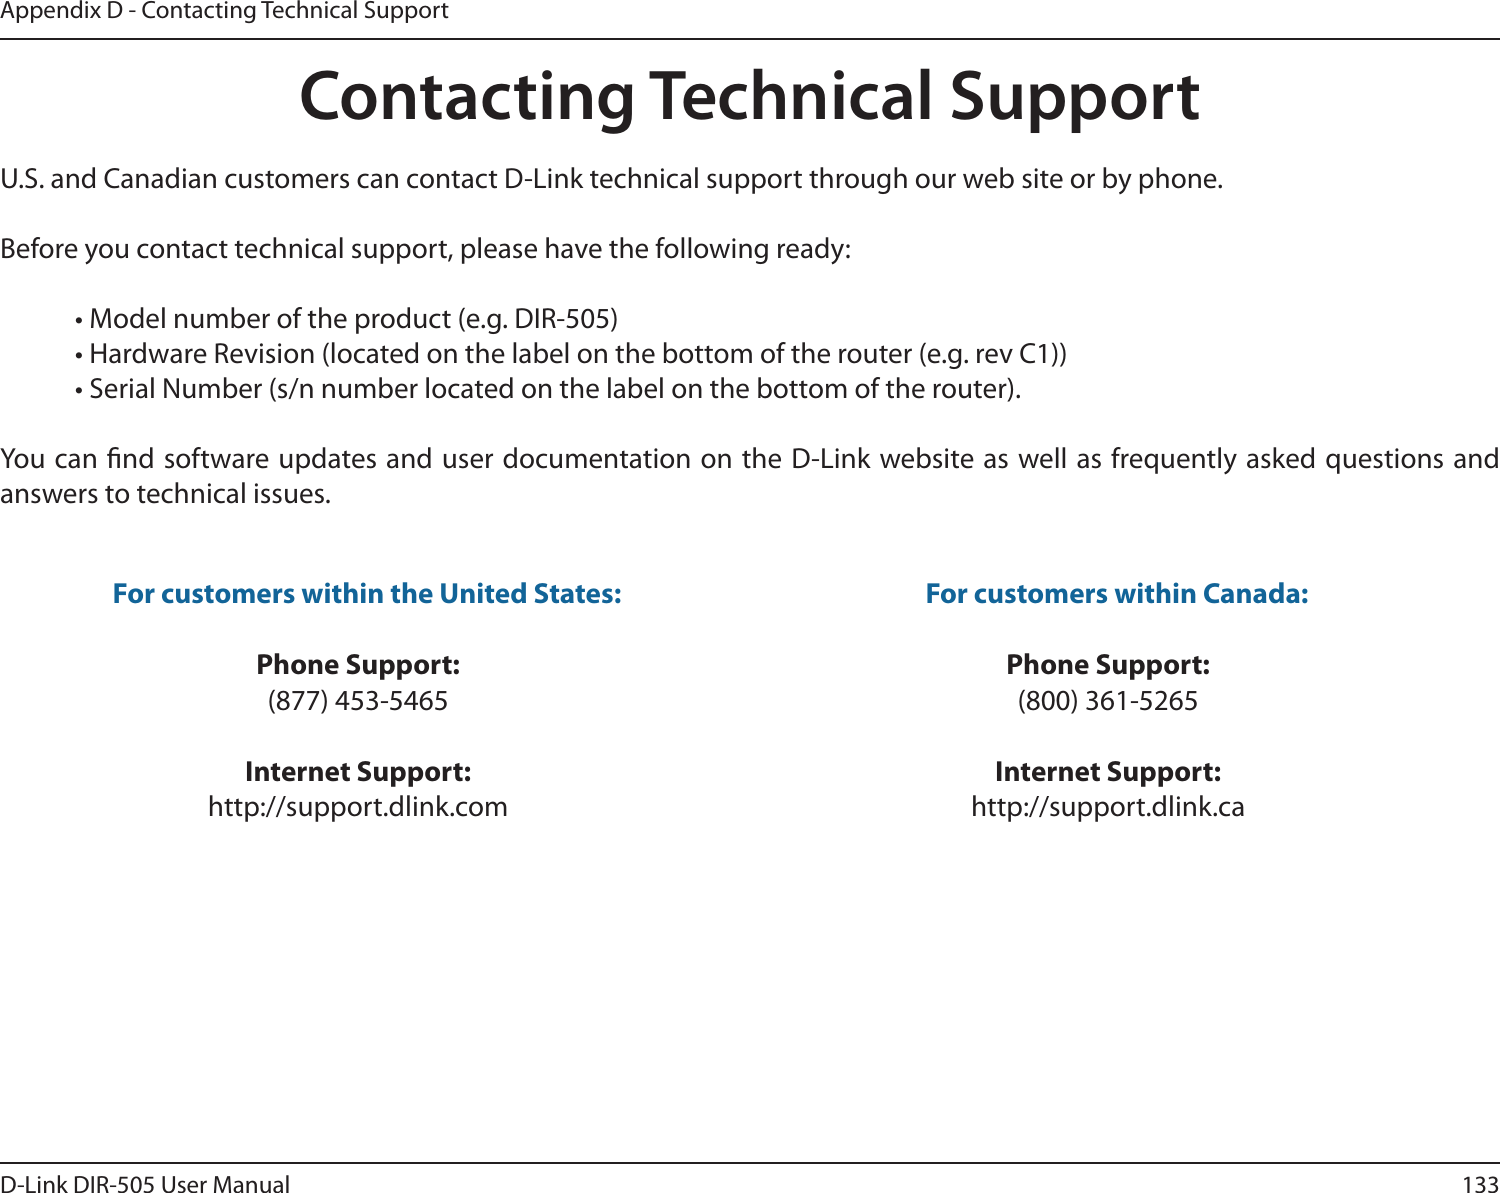 133D-Link DIR-505 User ManualAppendix D - Contacting Technical SupportContacting Technical SupportU.S. and Canadian customers can contact D-Link technical support through our web site or by phone.Before you contact technical support, please have the following ready:  • Model number of the product (e.g. DIR-505)  • Hardware Revision (located on the label on the bottom of the router (e.g. rev C1))  • Serial Number (s/n number located on the label on the bottom of the router). You can nd software updates and user documentation on the D-Link website as well as frequently asked questions and answers to technical issues.For customers within the United States: Phone Support:(877) 453-5465Internet Support:http://support.dlink.com For customers within Canada: Phone Support:(800) 361-5265Internet Support:http://support.dlink.ca 